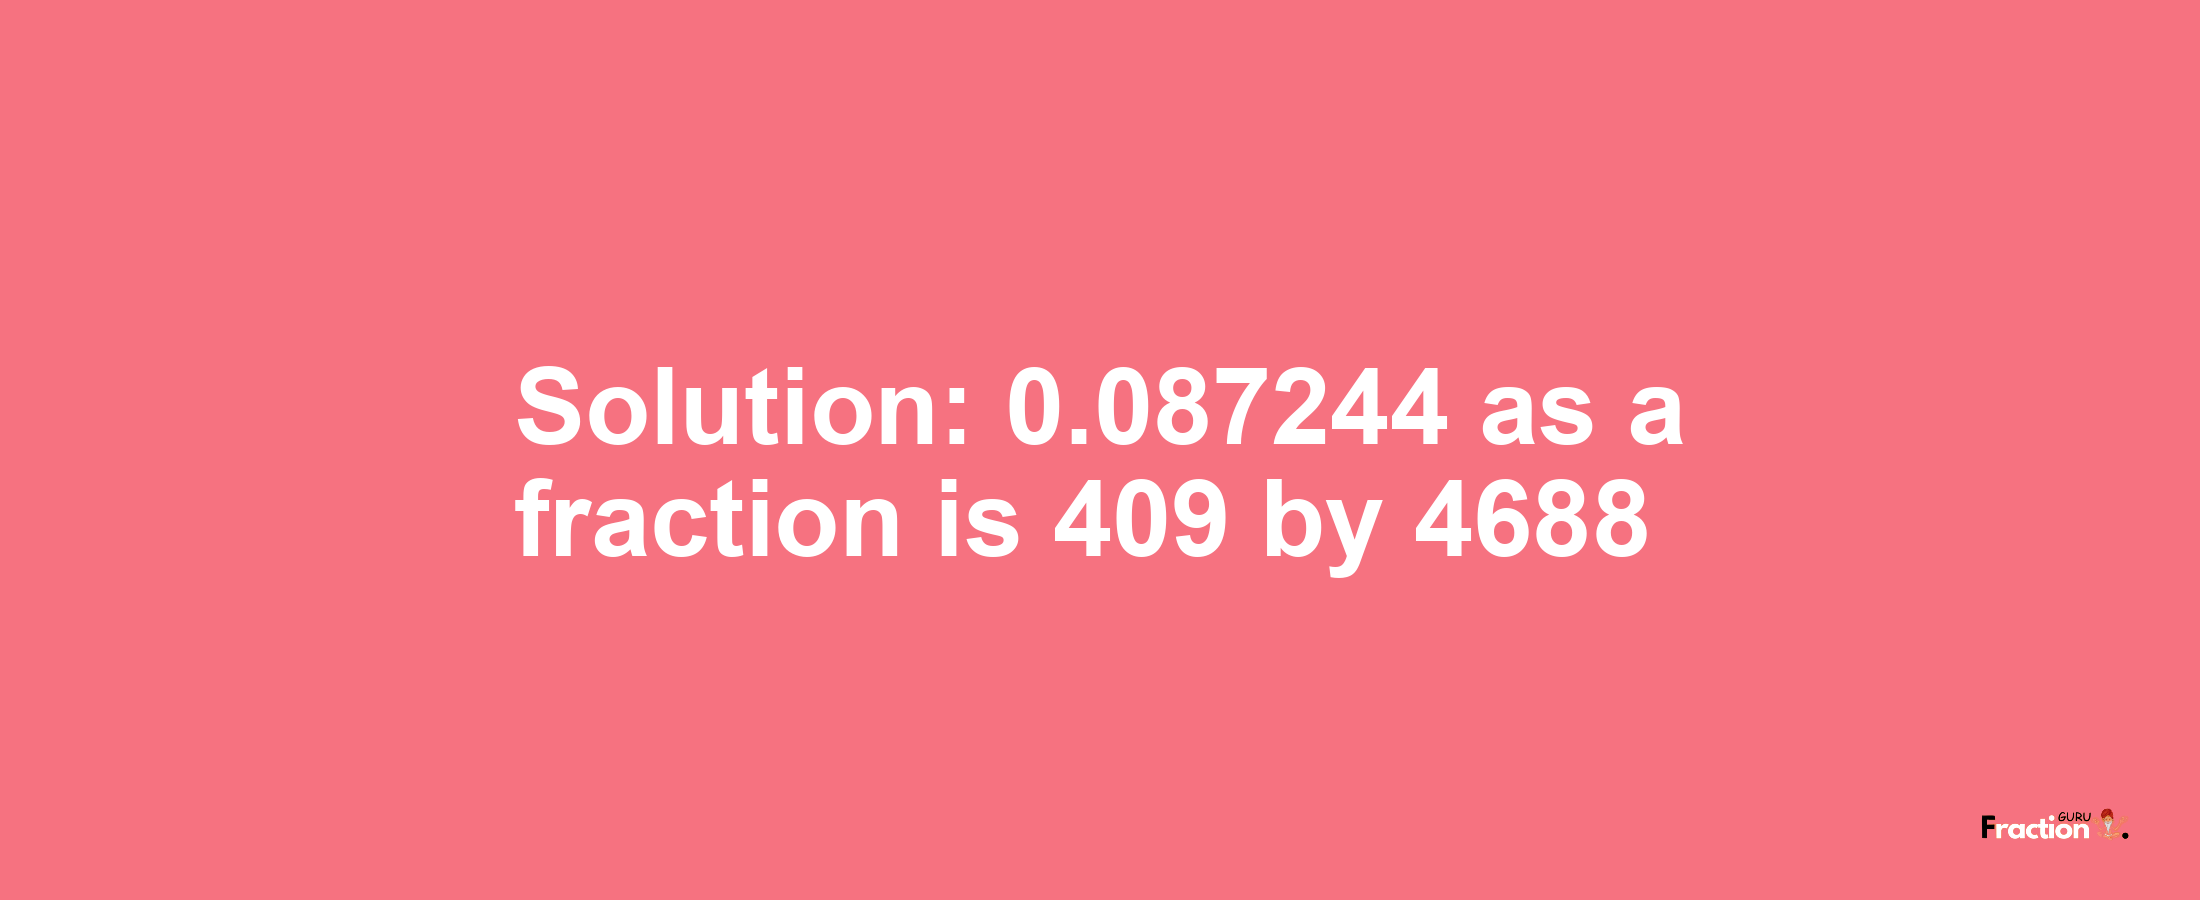 Solution:0.087244 as a fraction is 409/4688